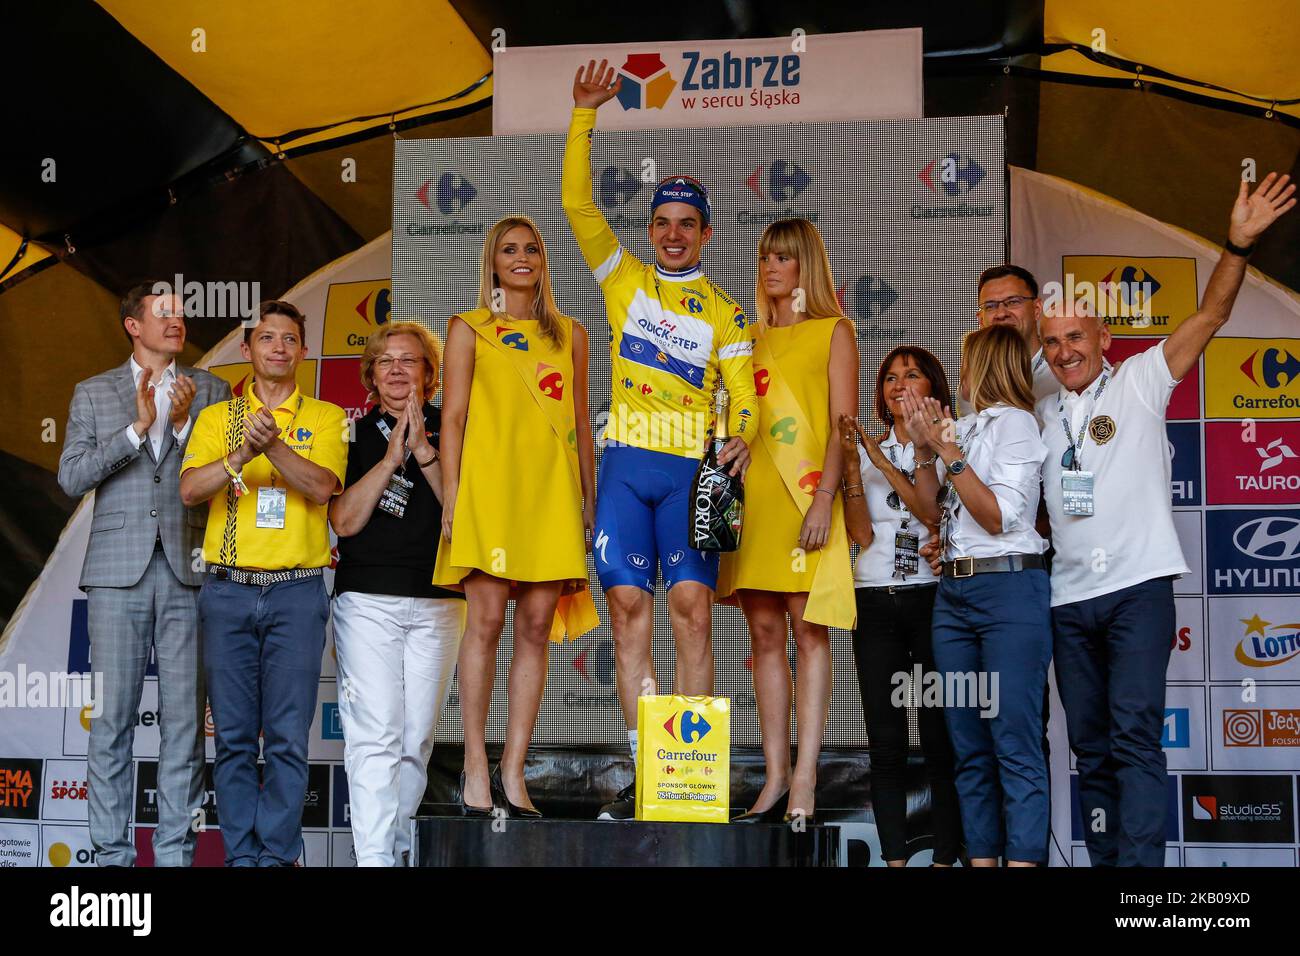 Alvaro Jose HODEG CHAGUI receives yellow jersey in as best rider in general classification during the decoration ceremony after winning third stage of 75th Tour de Pologne, UCI World Tour in Zabrze, Poland on August 6, 2018. (Photo by Dominika Zarzycka/NurPhoto) Stock Photo